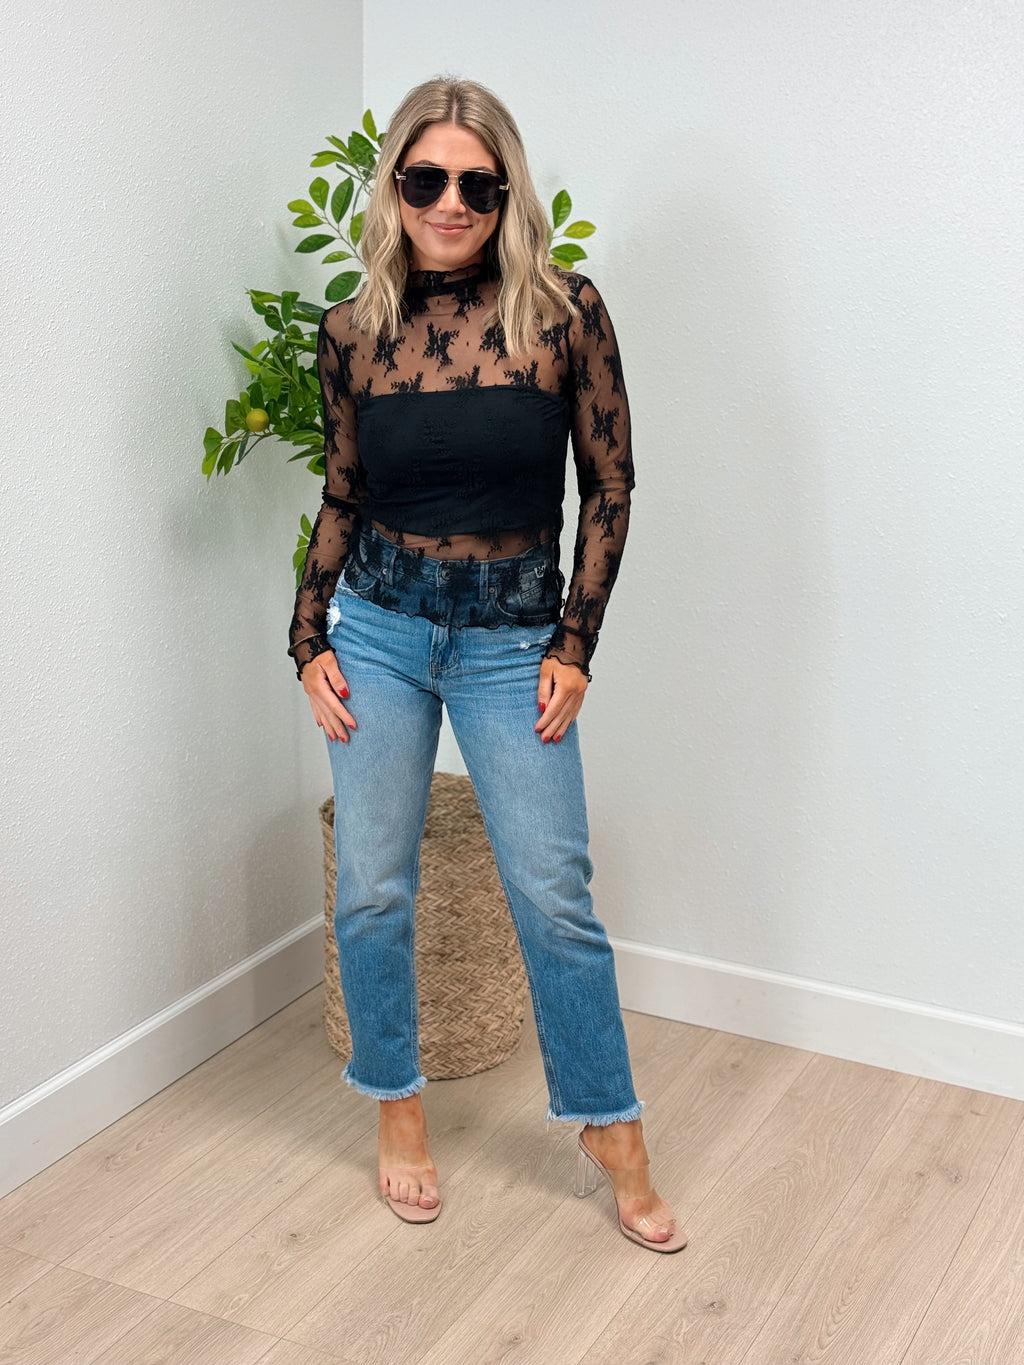 Timeless Sheer Lace Layering Blouse - Black